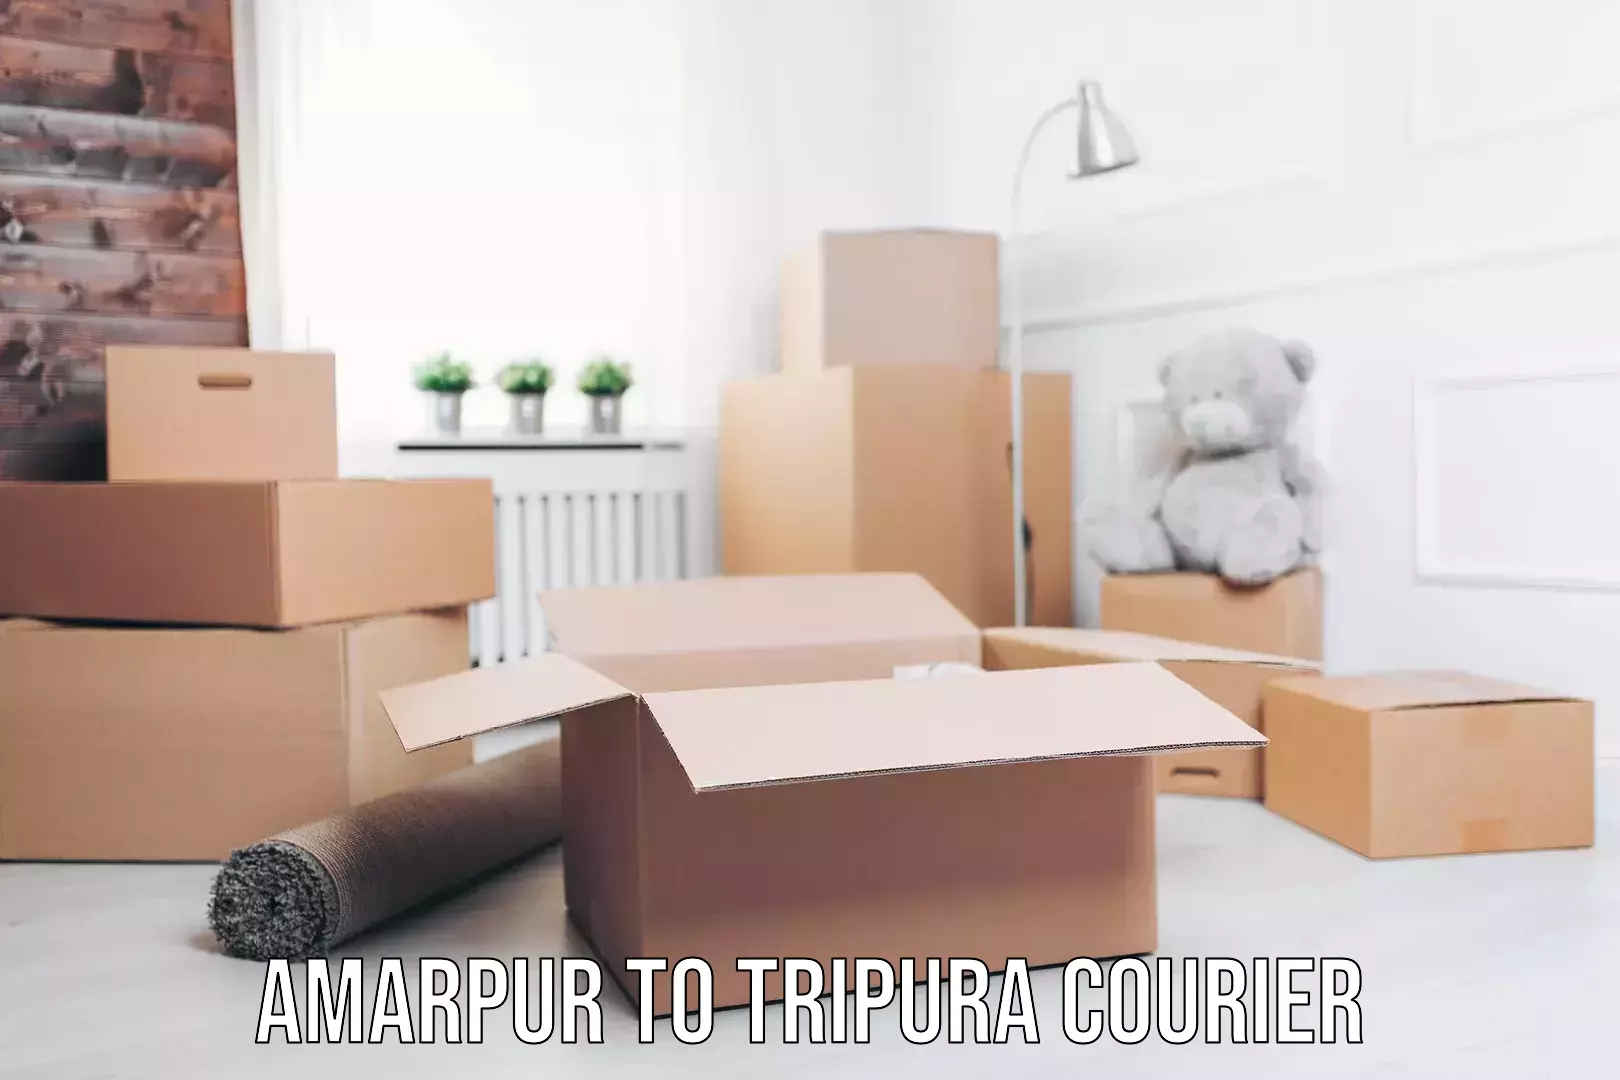 Residential courier service Amarpur to Tripura